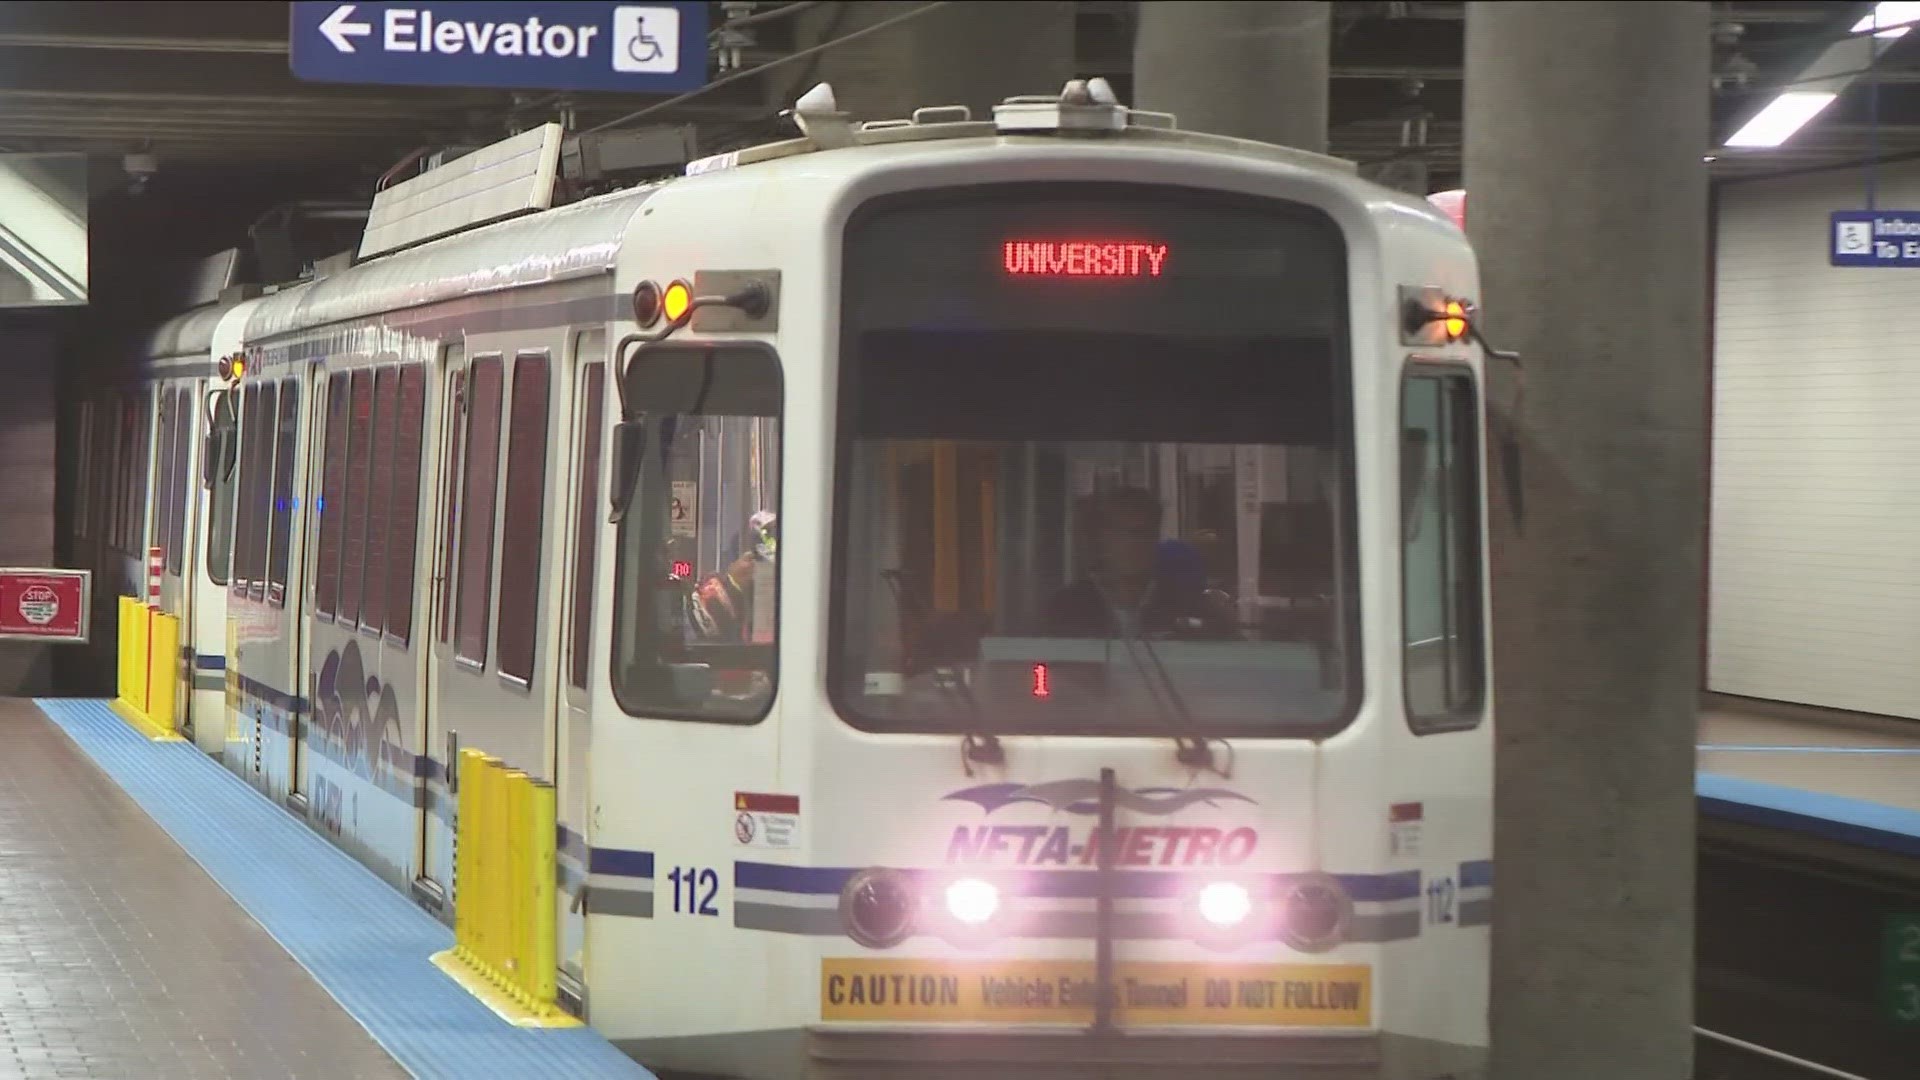 The NFTA says adding a light rail would do nothing but contribute positively to the Amherst community, bringing significant economic development with it.